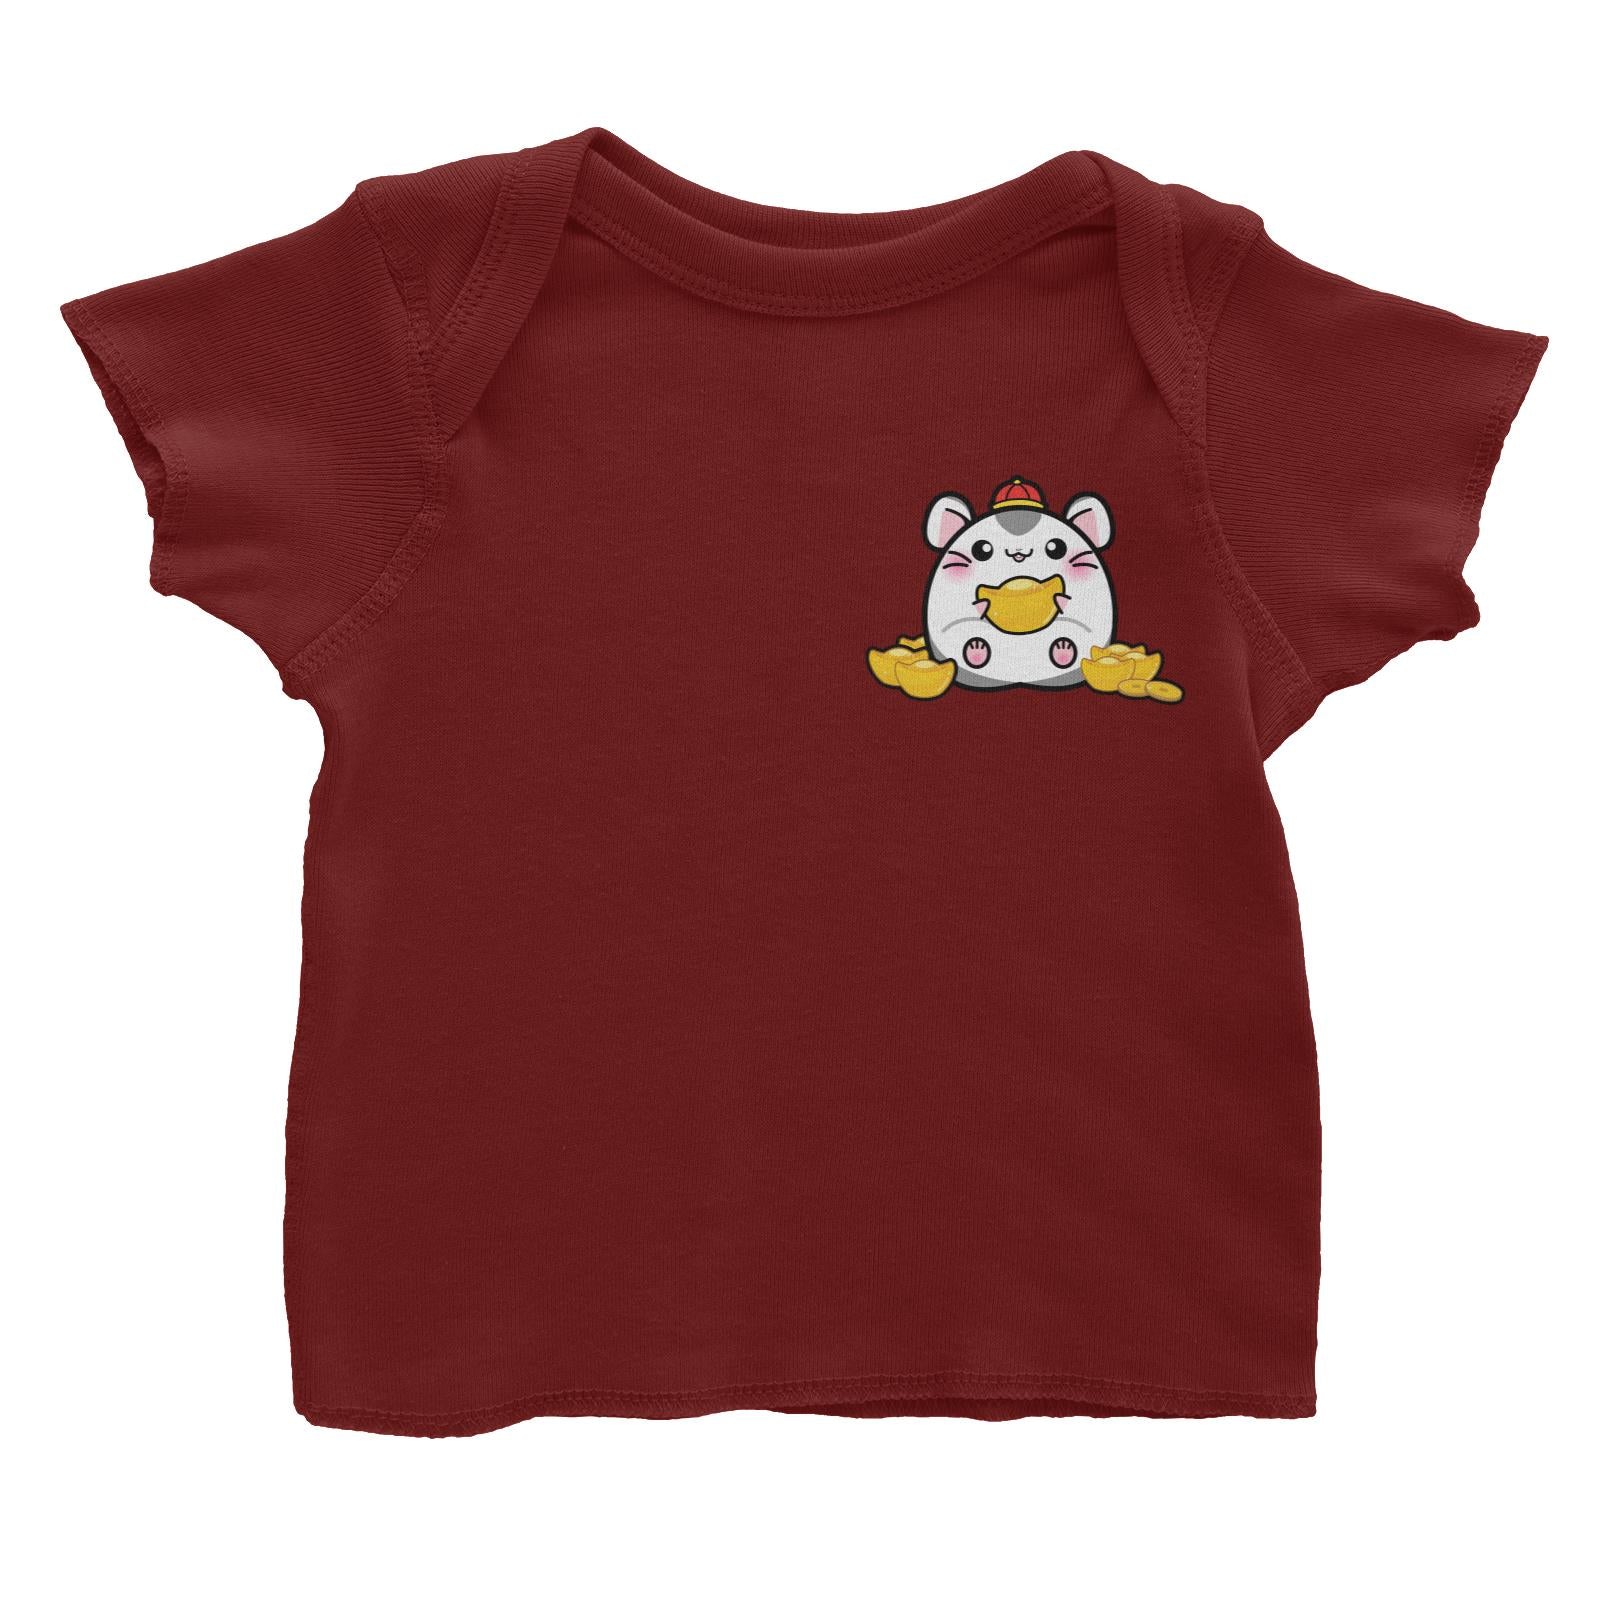 Prosperous Pocket Mouse Series Golden Jim Wishes Happy Prosperity Baby T-Shirt